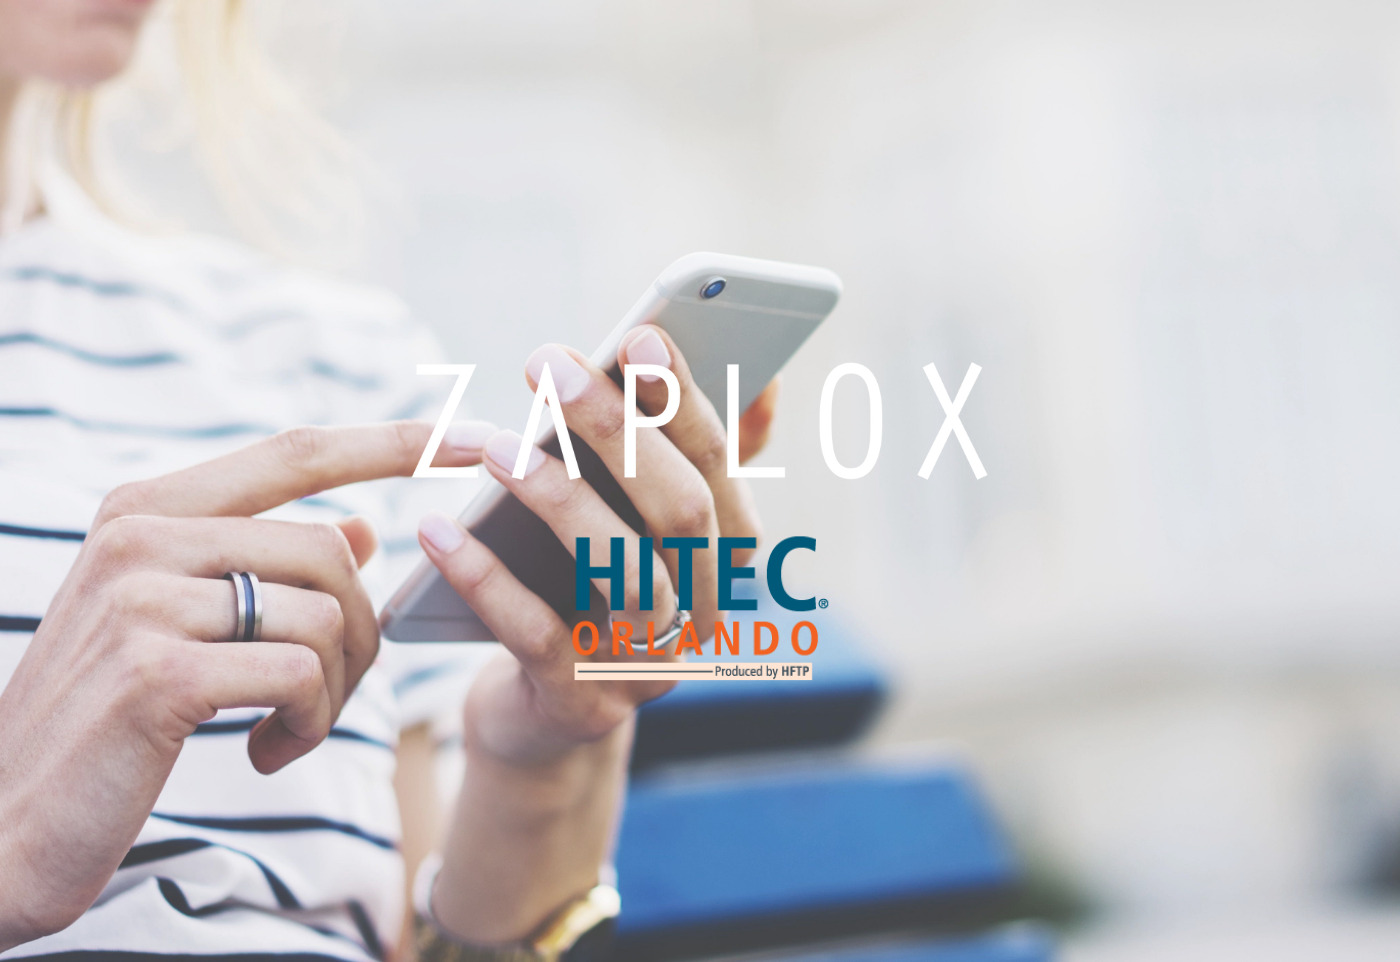 Zaplox New Mobile Key App Connects Digital Keys to Online Web Check-in